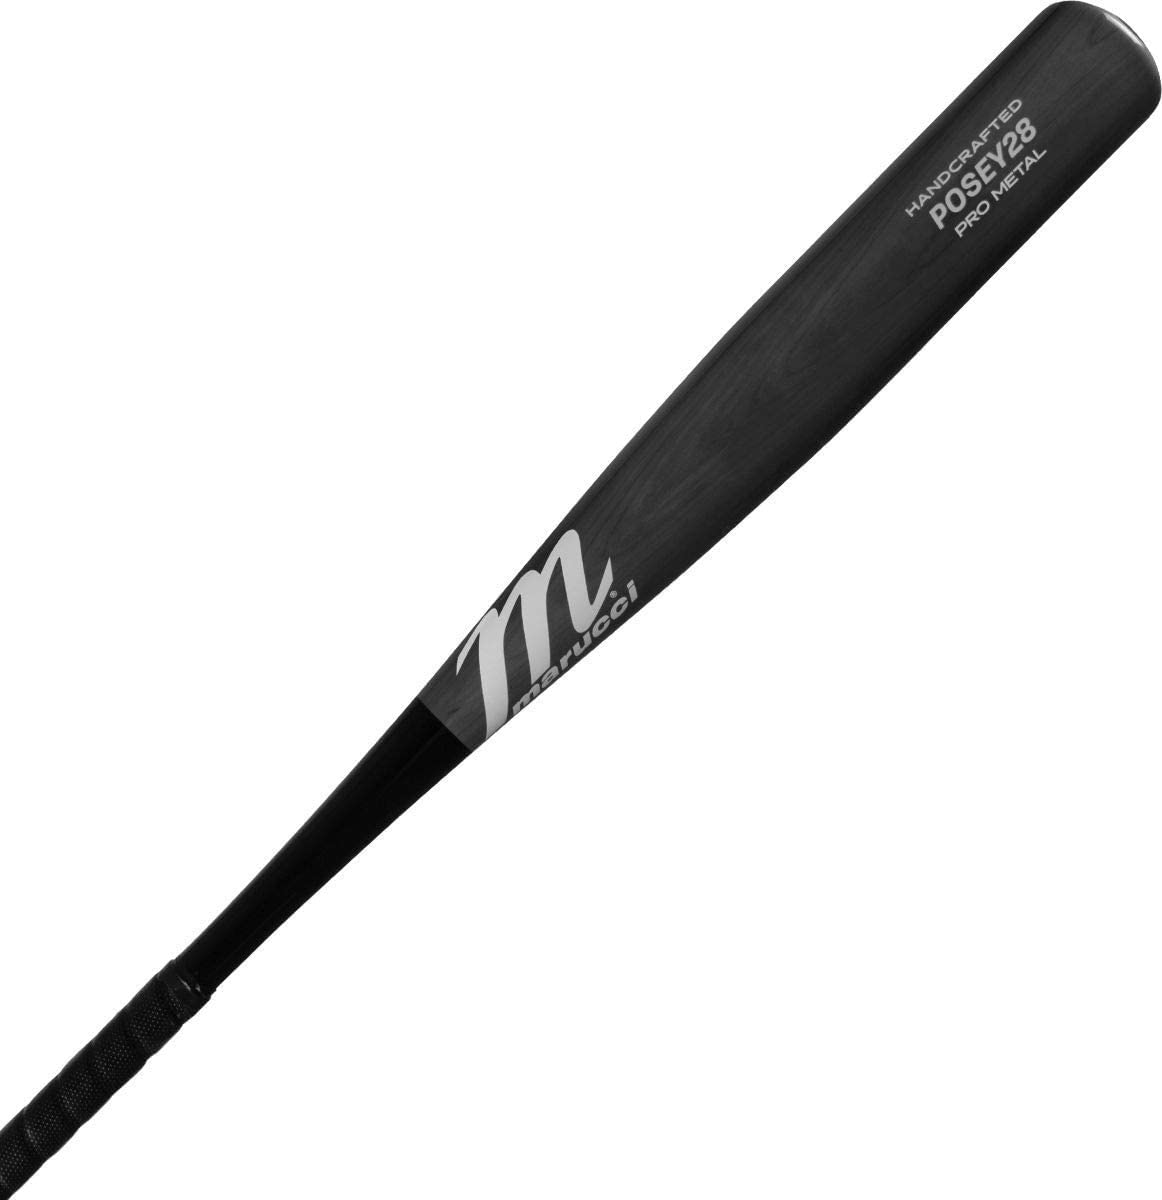 marucci-posey28-3-bbcor-baseball-bat-33-5-inch-30-5-oz MCBP28S-335 Marucci  The Marucci Posey Metal Pro baseball bat is constructed from AZ105